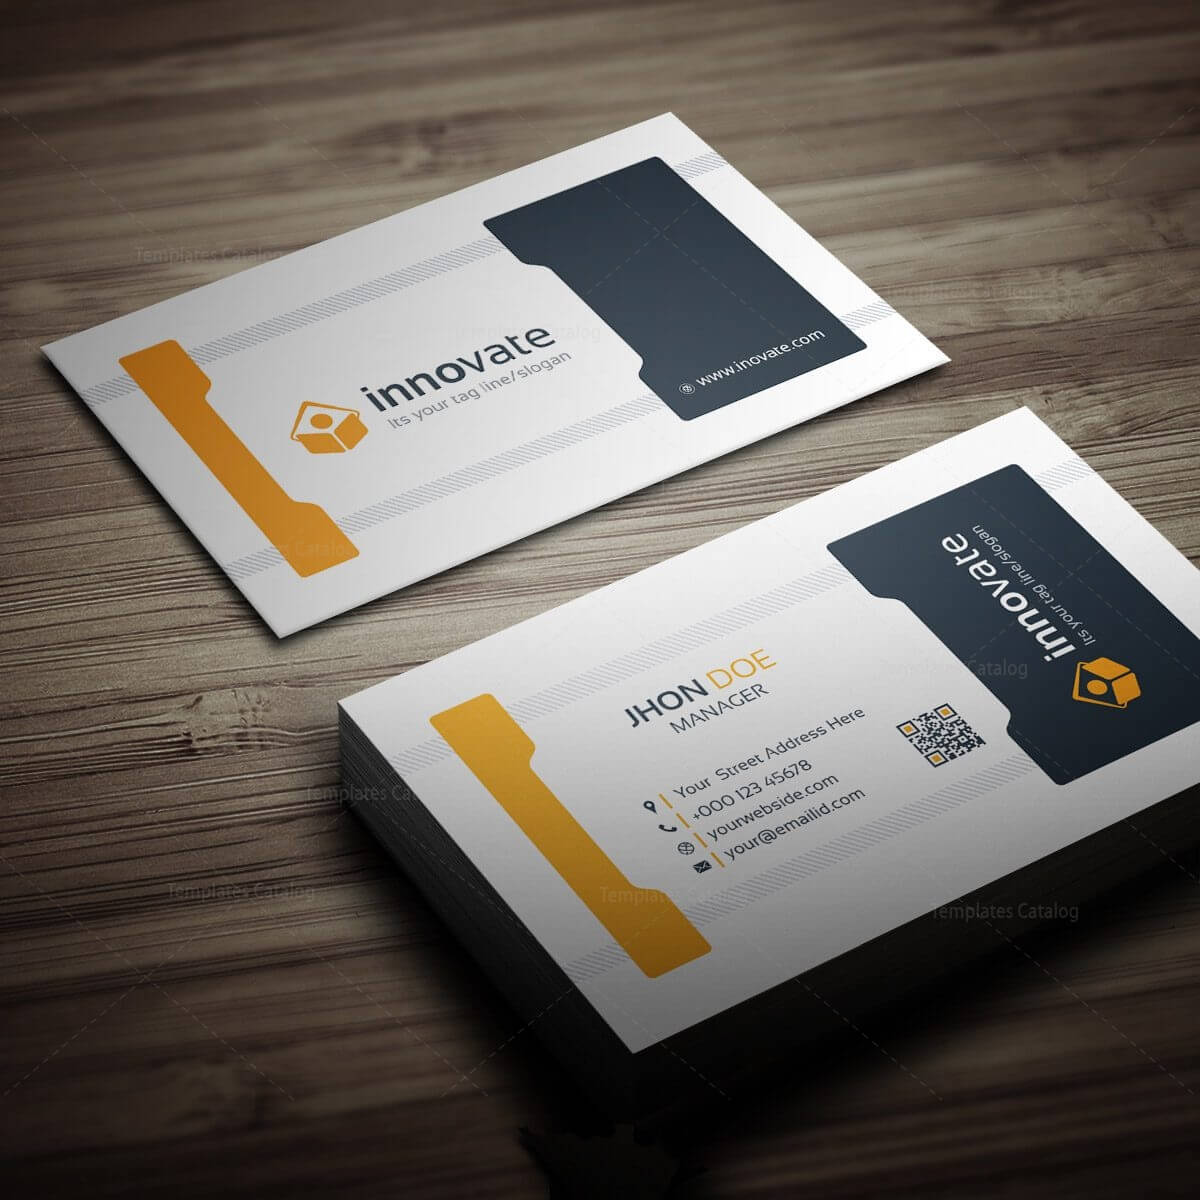 Innovate Business Card Template 000277 – Template Catalog Throughout Adobe Illustrator Business Card Template